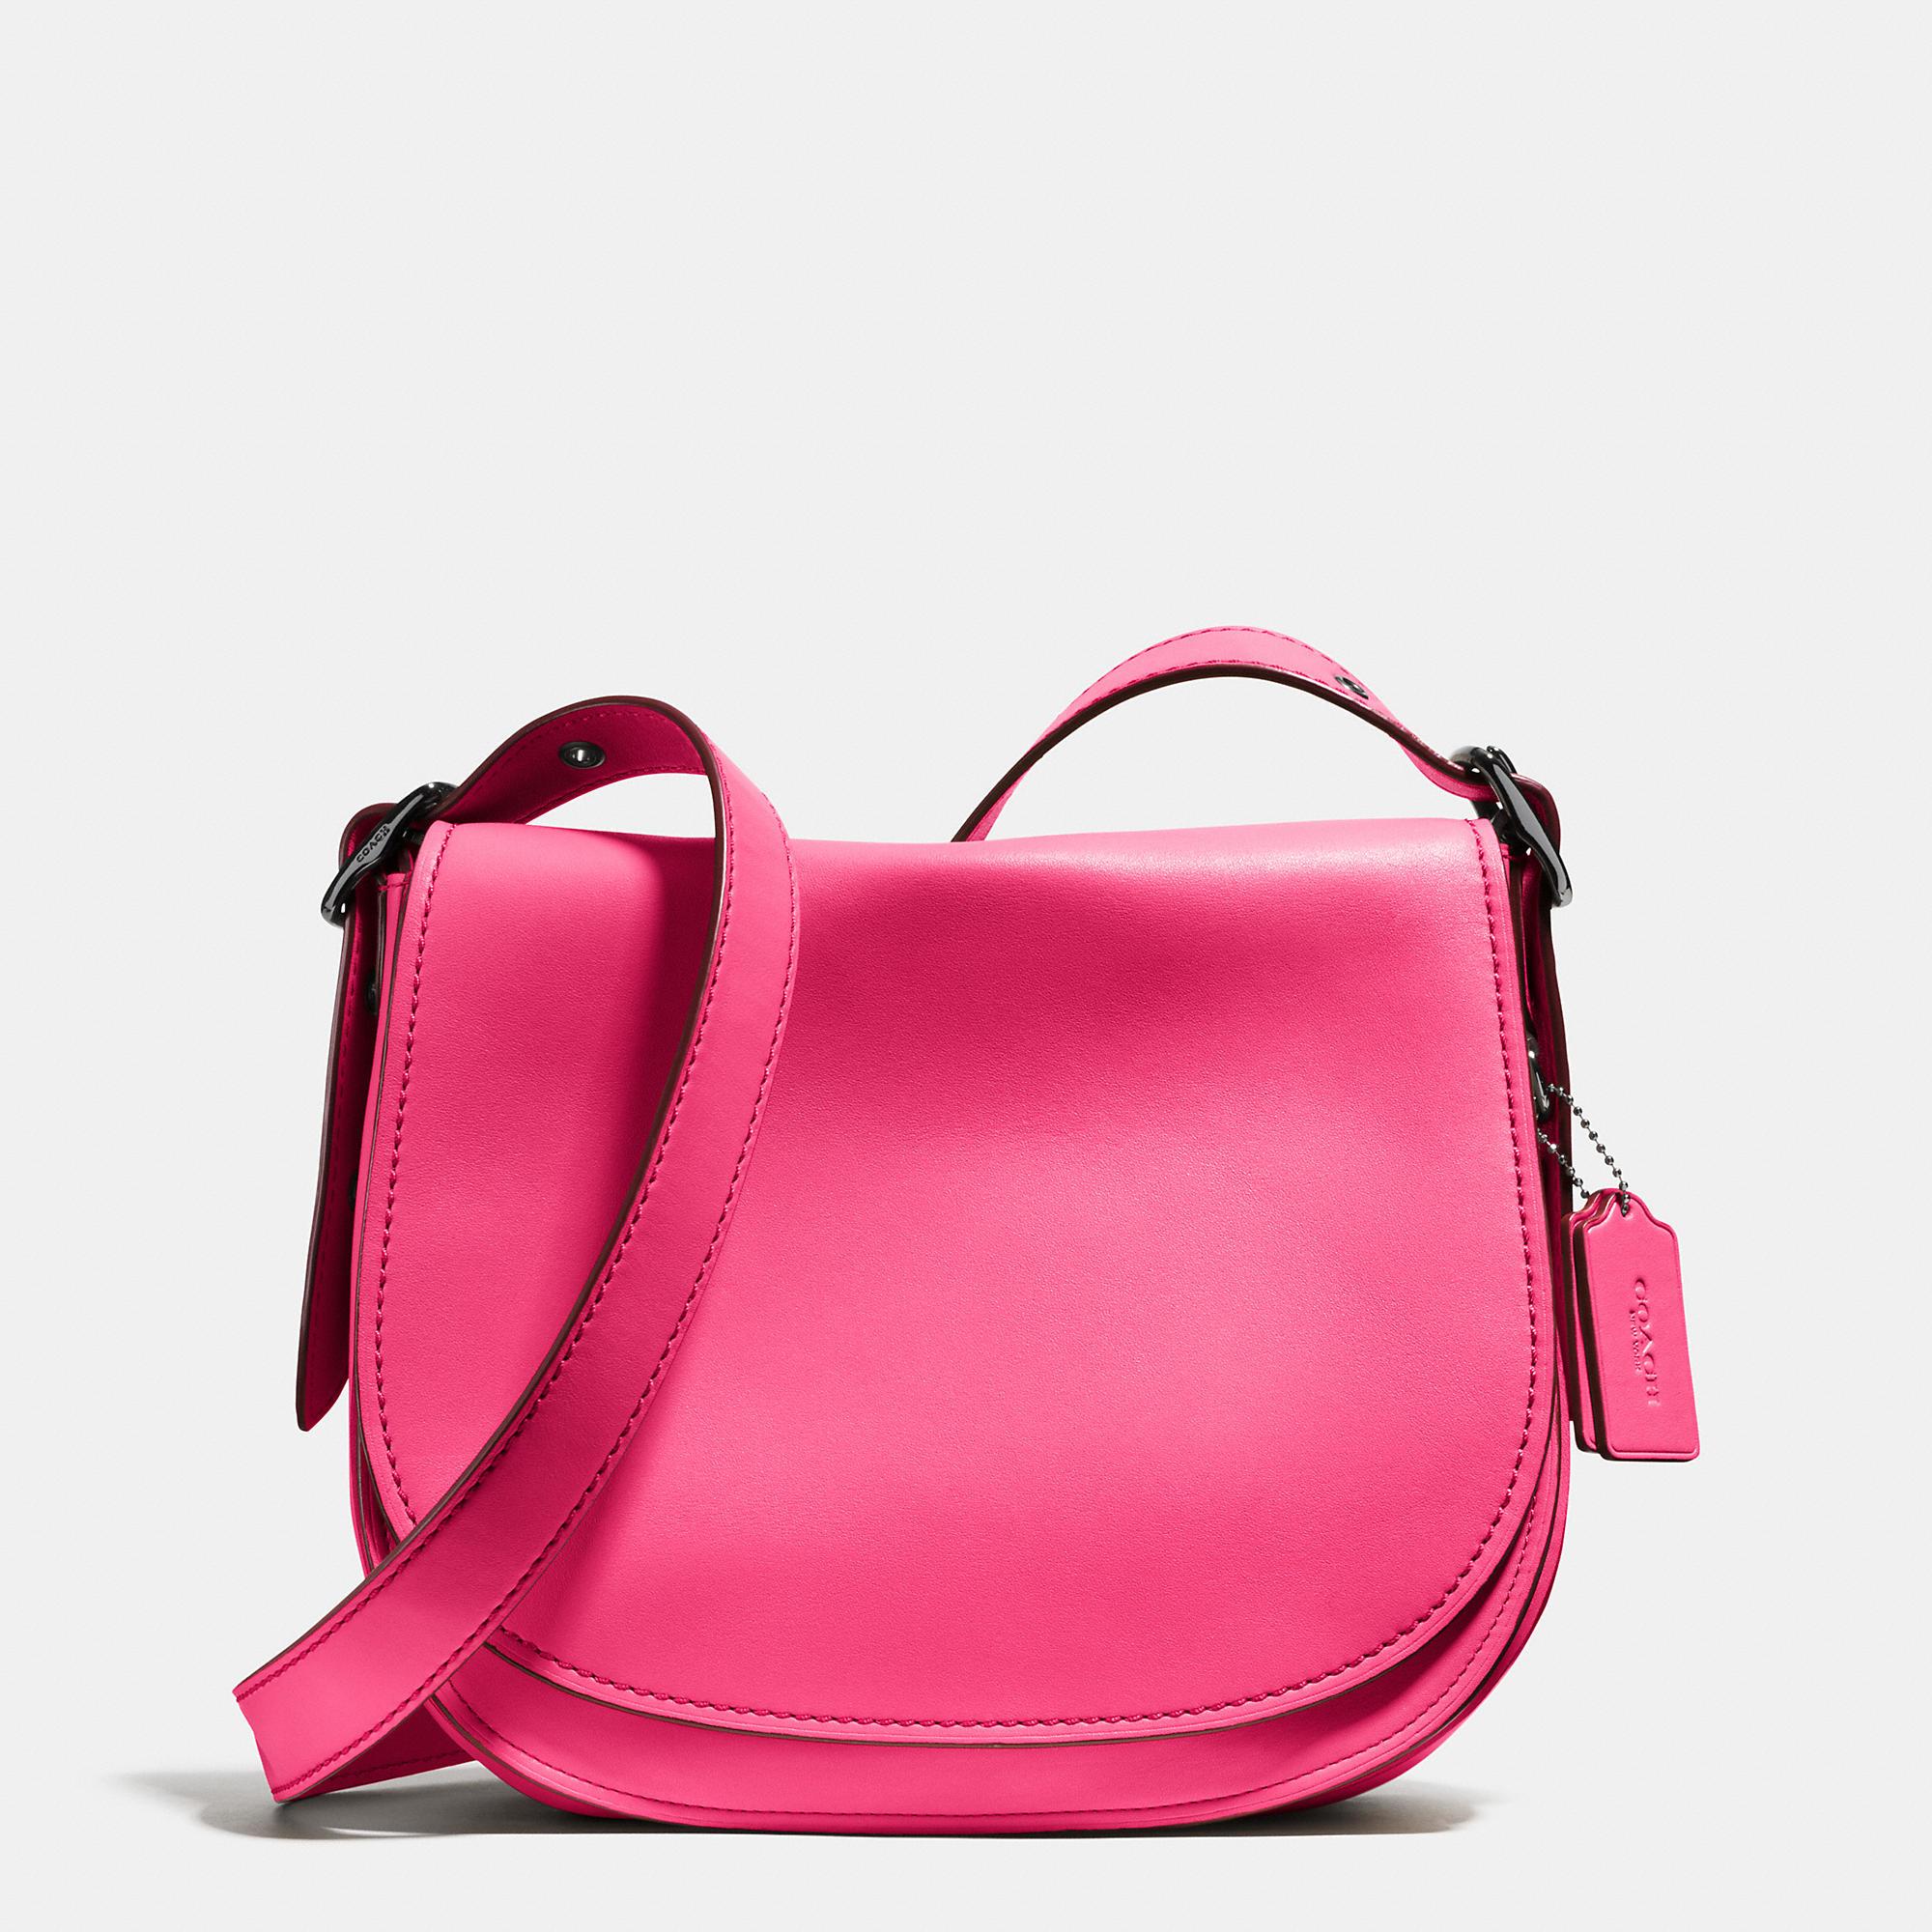 Lyst - Coach Saddle Bag In Glovetanned Leather in Pink